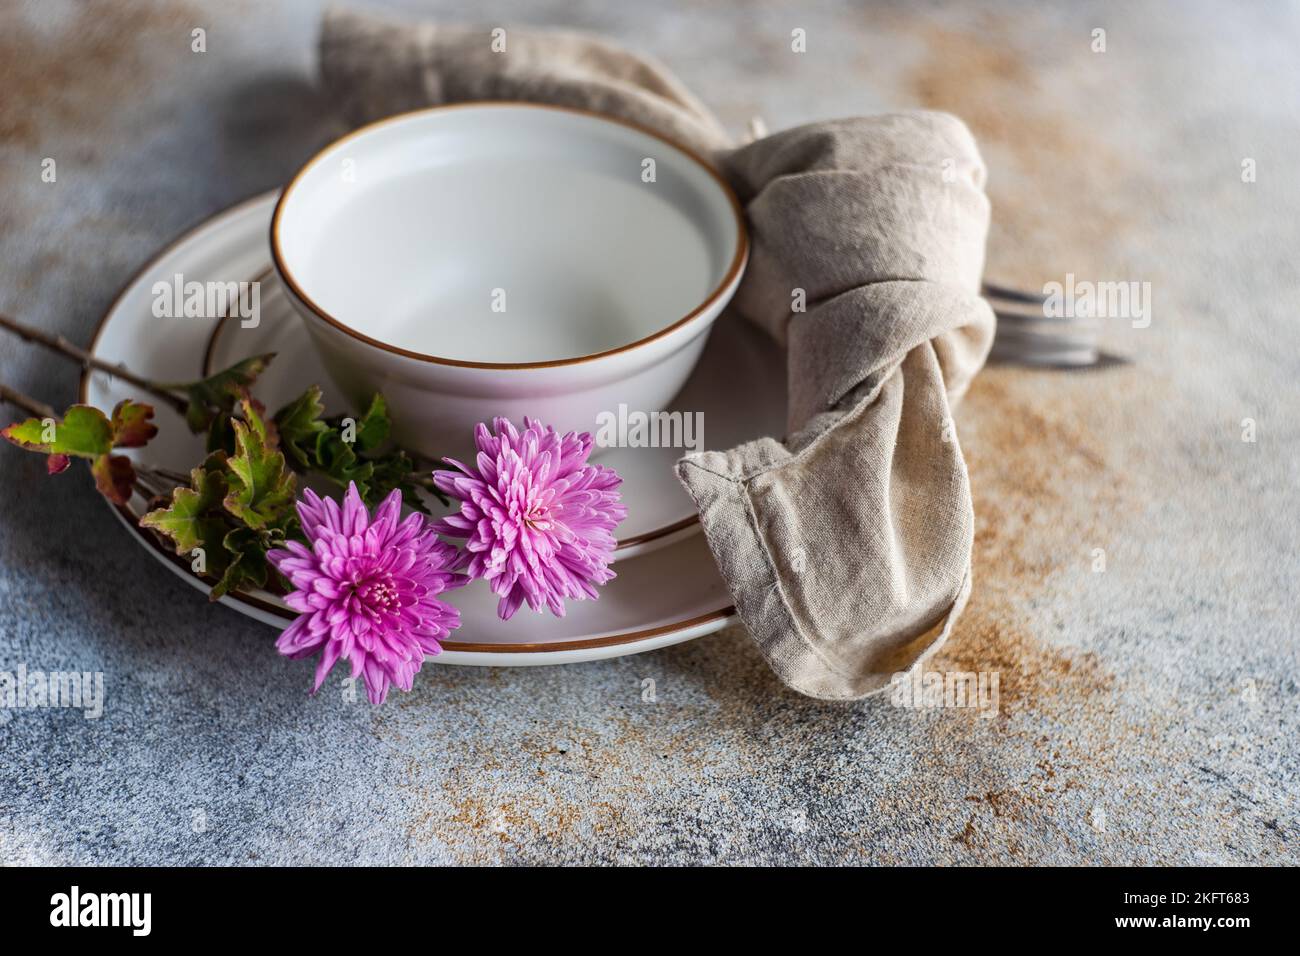 Place setting with purple Chrysanthemum flowers on concrete table with plates Stock Photo